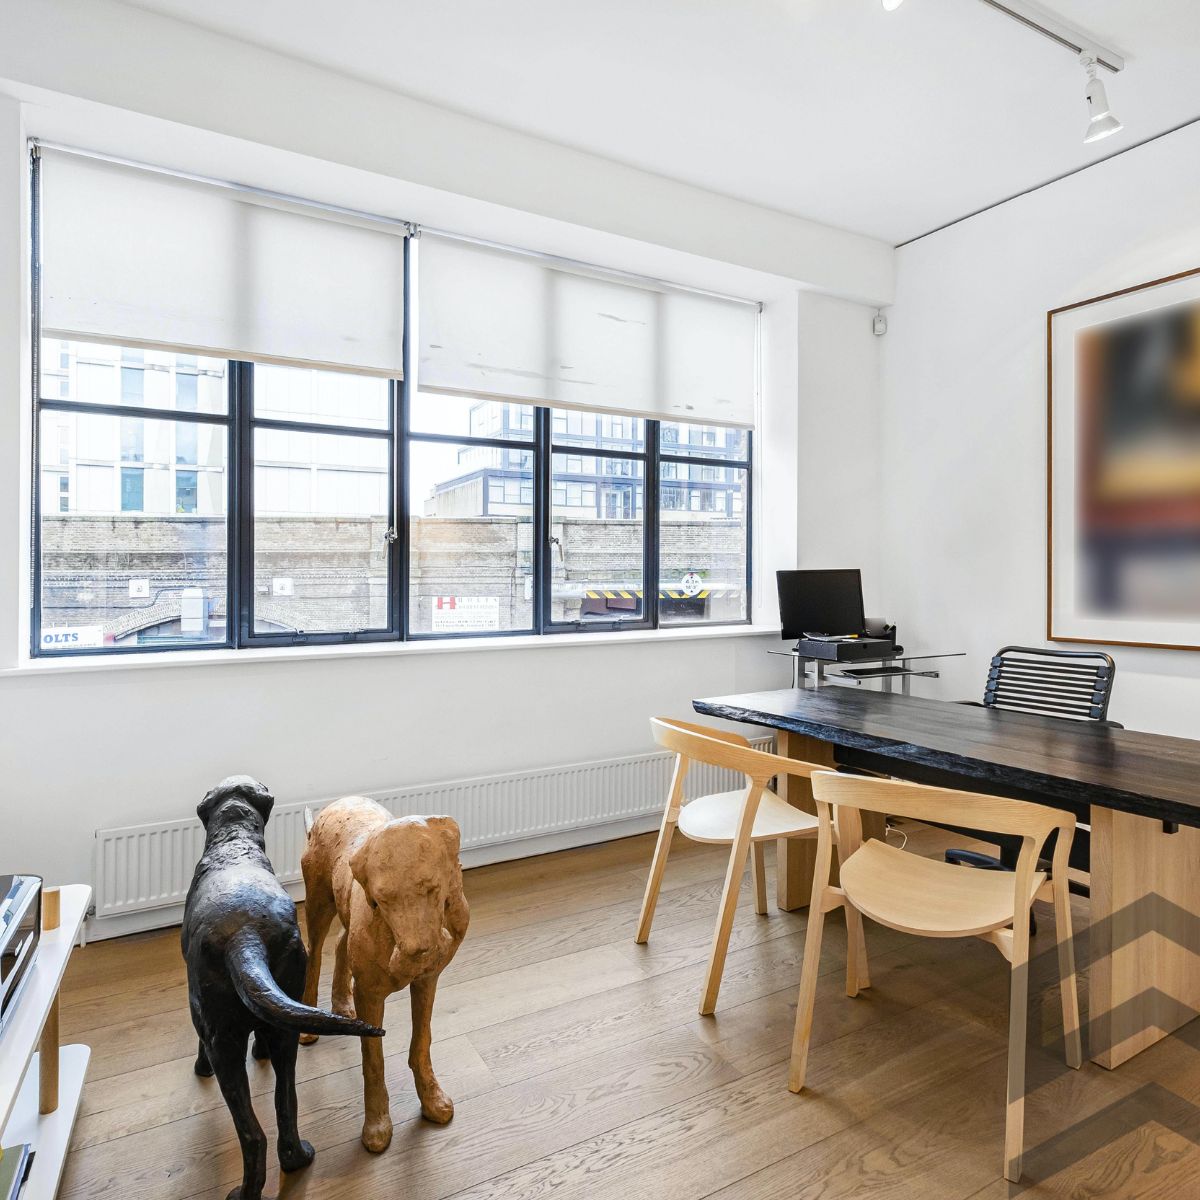 Occupier / Investor Opportunity A rare opportunity to purchase or lease a stunning 10,905sq ft building in prime Shoreditch. A truly inspiring space that would undoubtedly suit creative occupiers including fashion and design. Contact our team for more information.